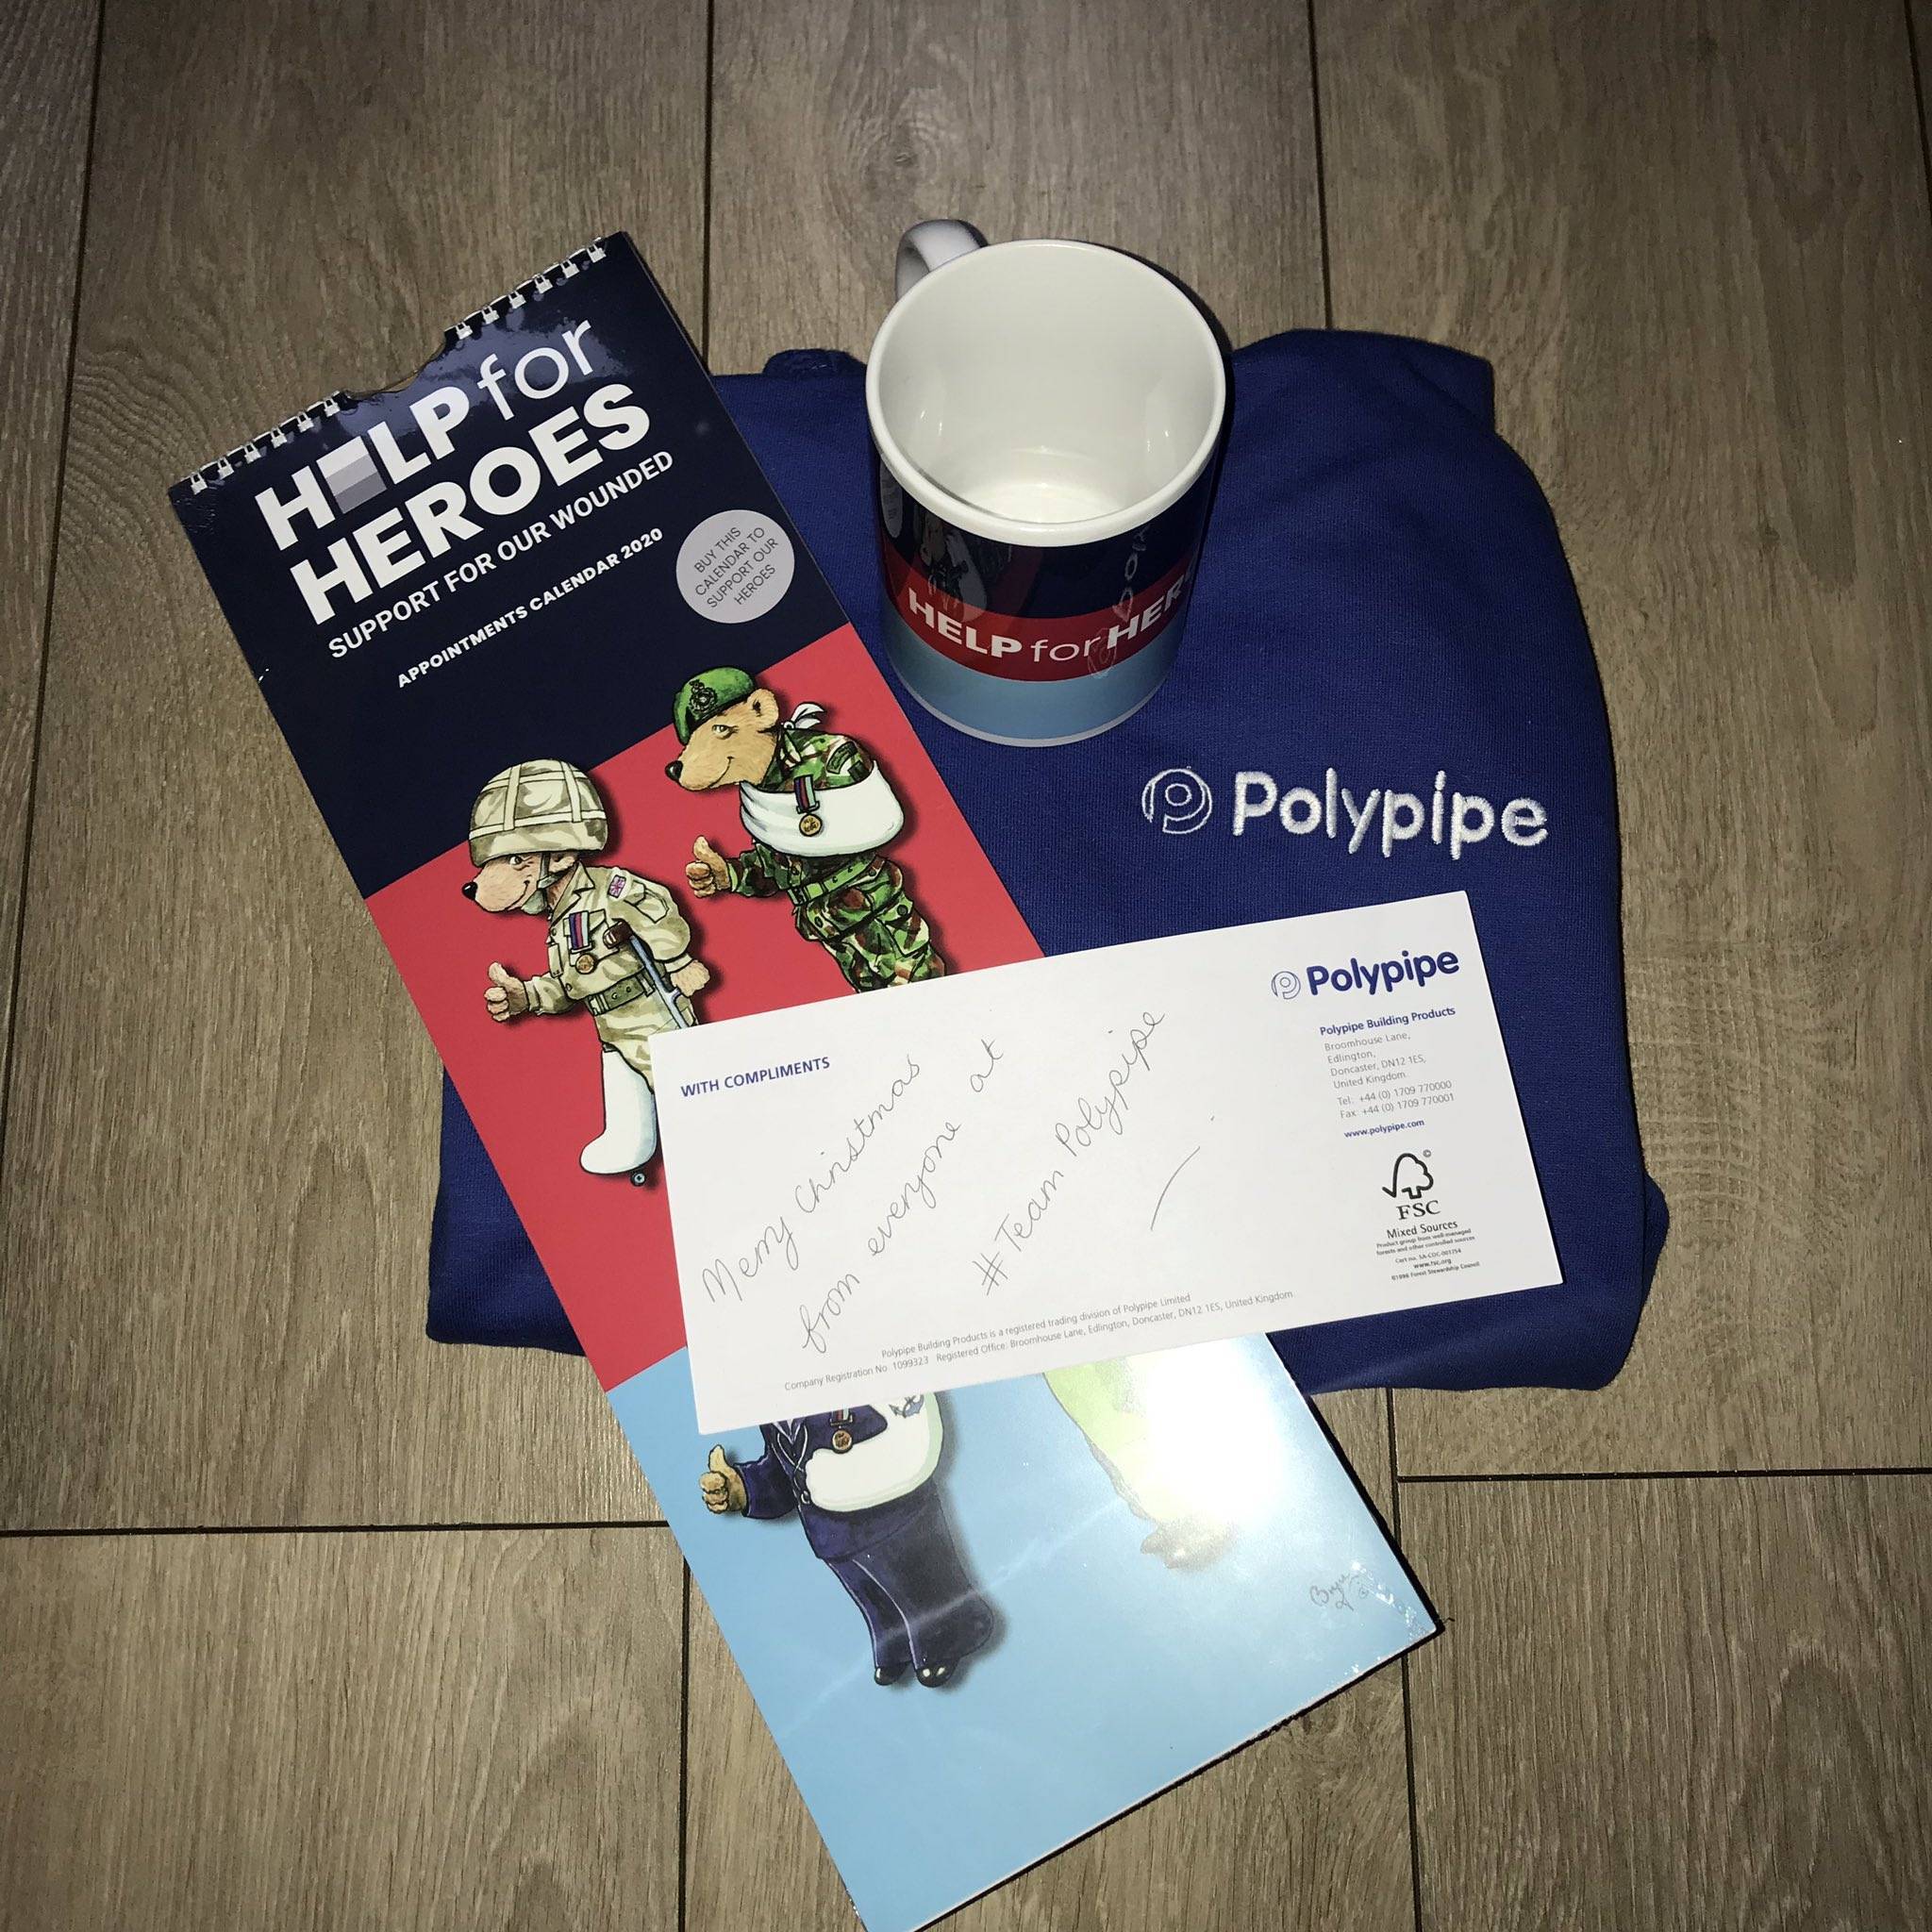 Help for Heroes Mug and Calendar with a Polypipe calendar and note saying 'Merry Christmas from everyone at #TeamPolypipe'